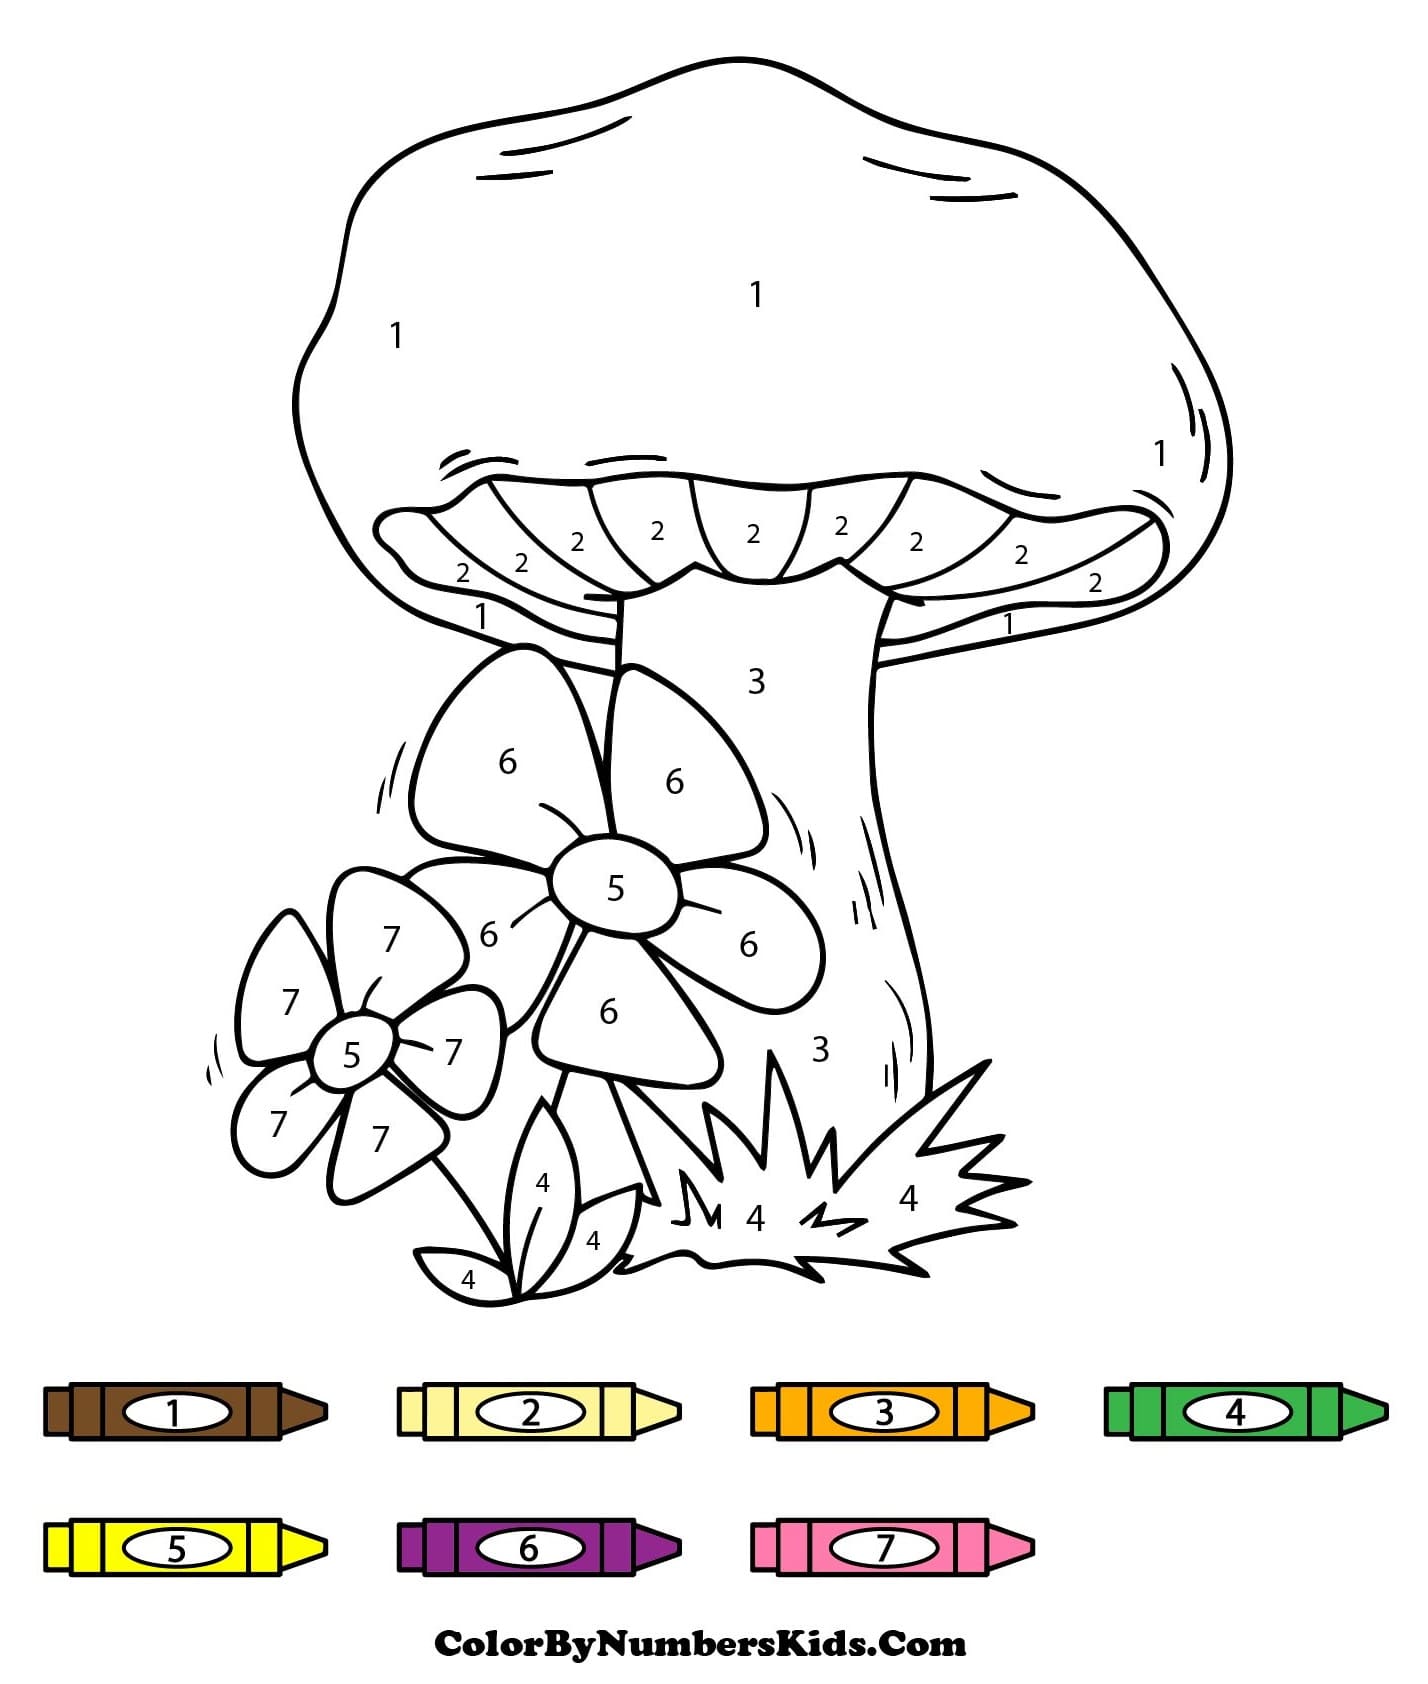 Flowers and Mushroom Color By Number